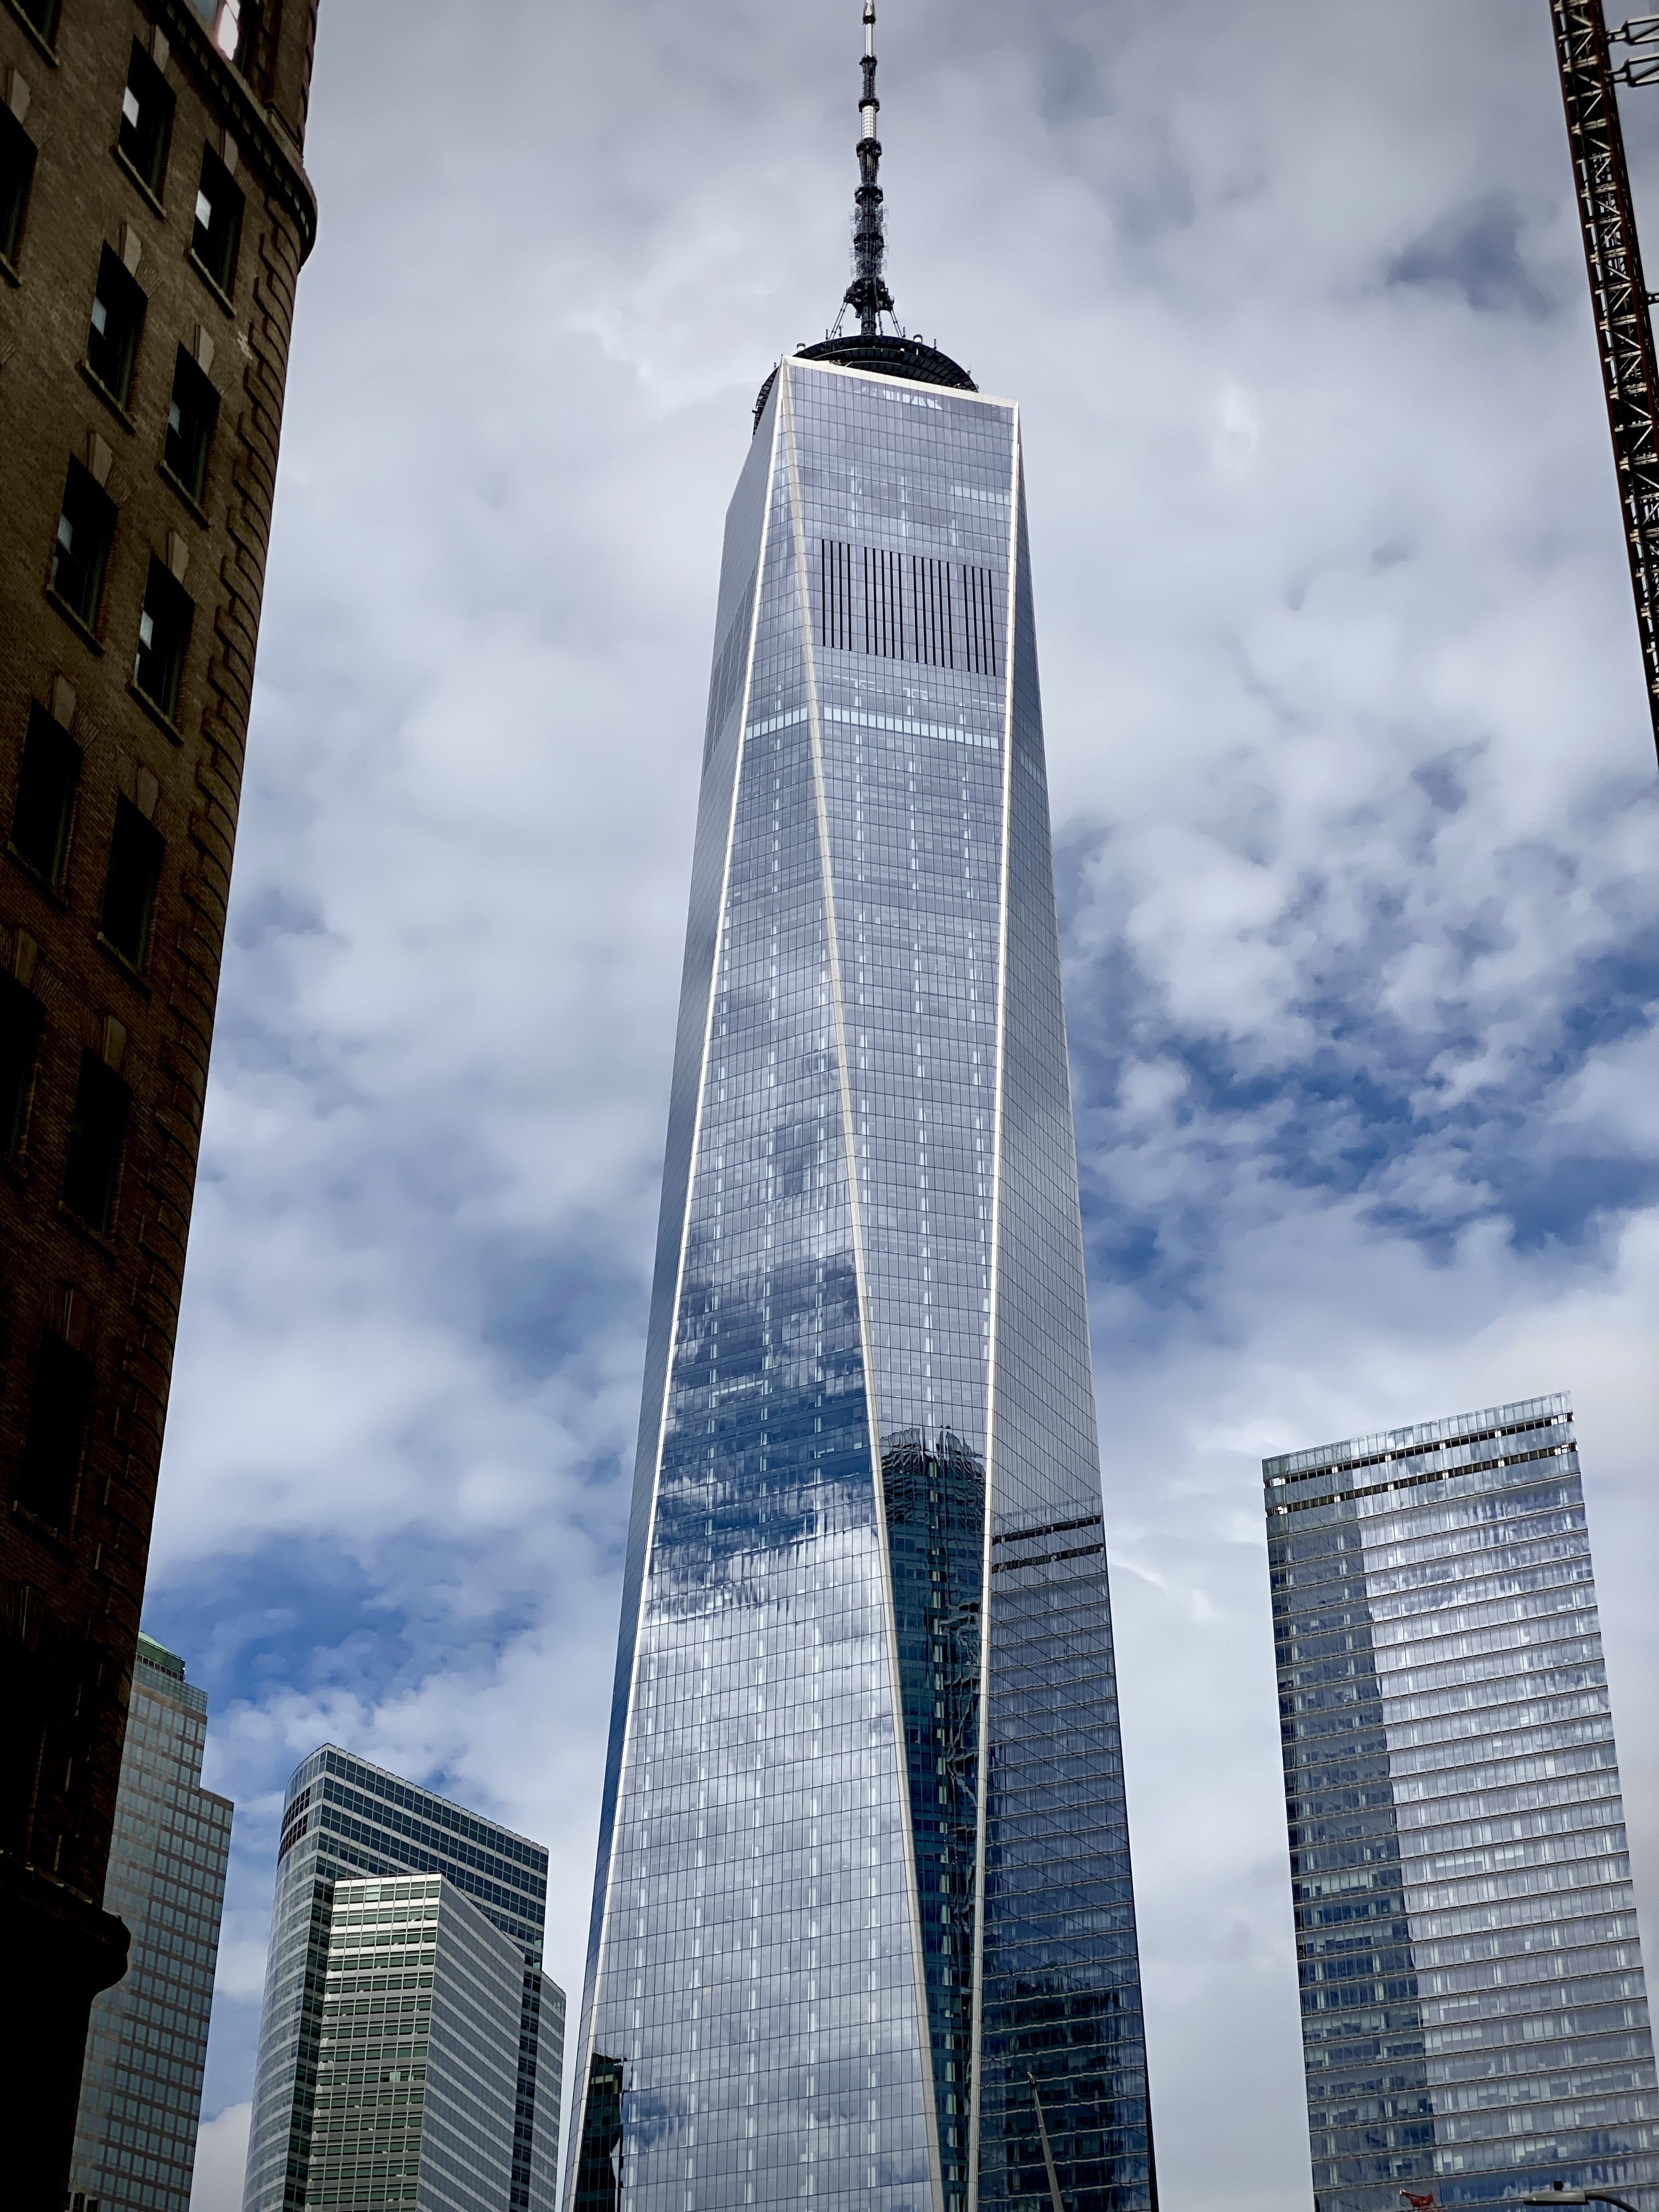 New York City's One World Trade Center, the tallest building in the United States